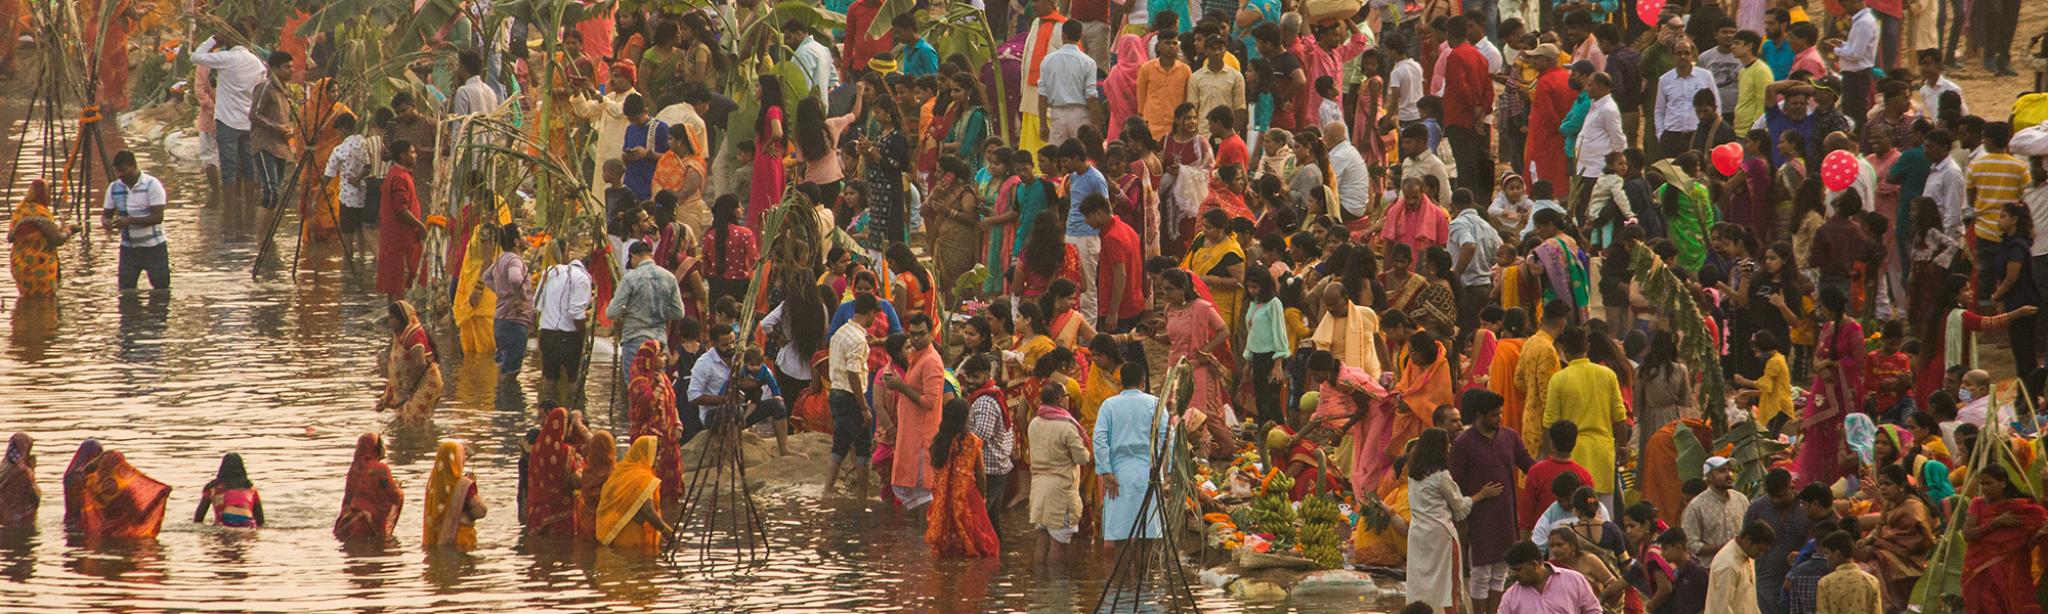 Celebration of chhath puja, worshipping of the sun. Chhath Puja is one of the most major festivals of India.